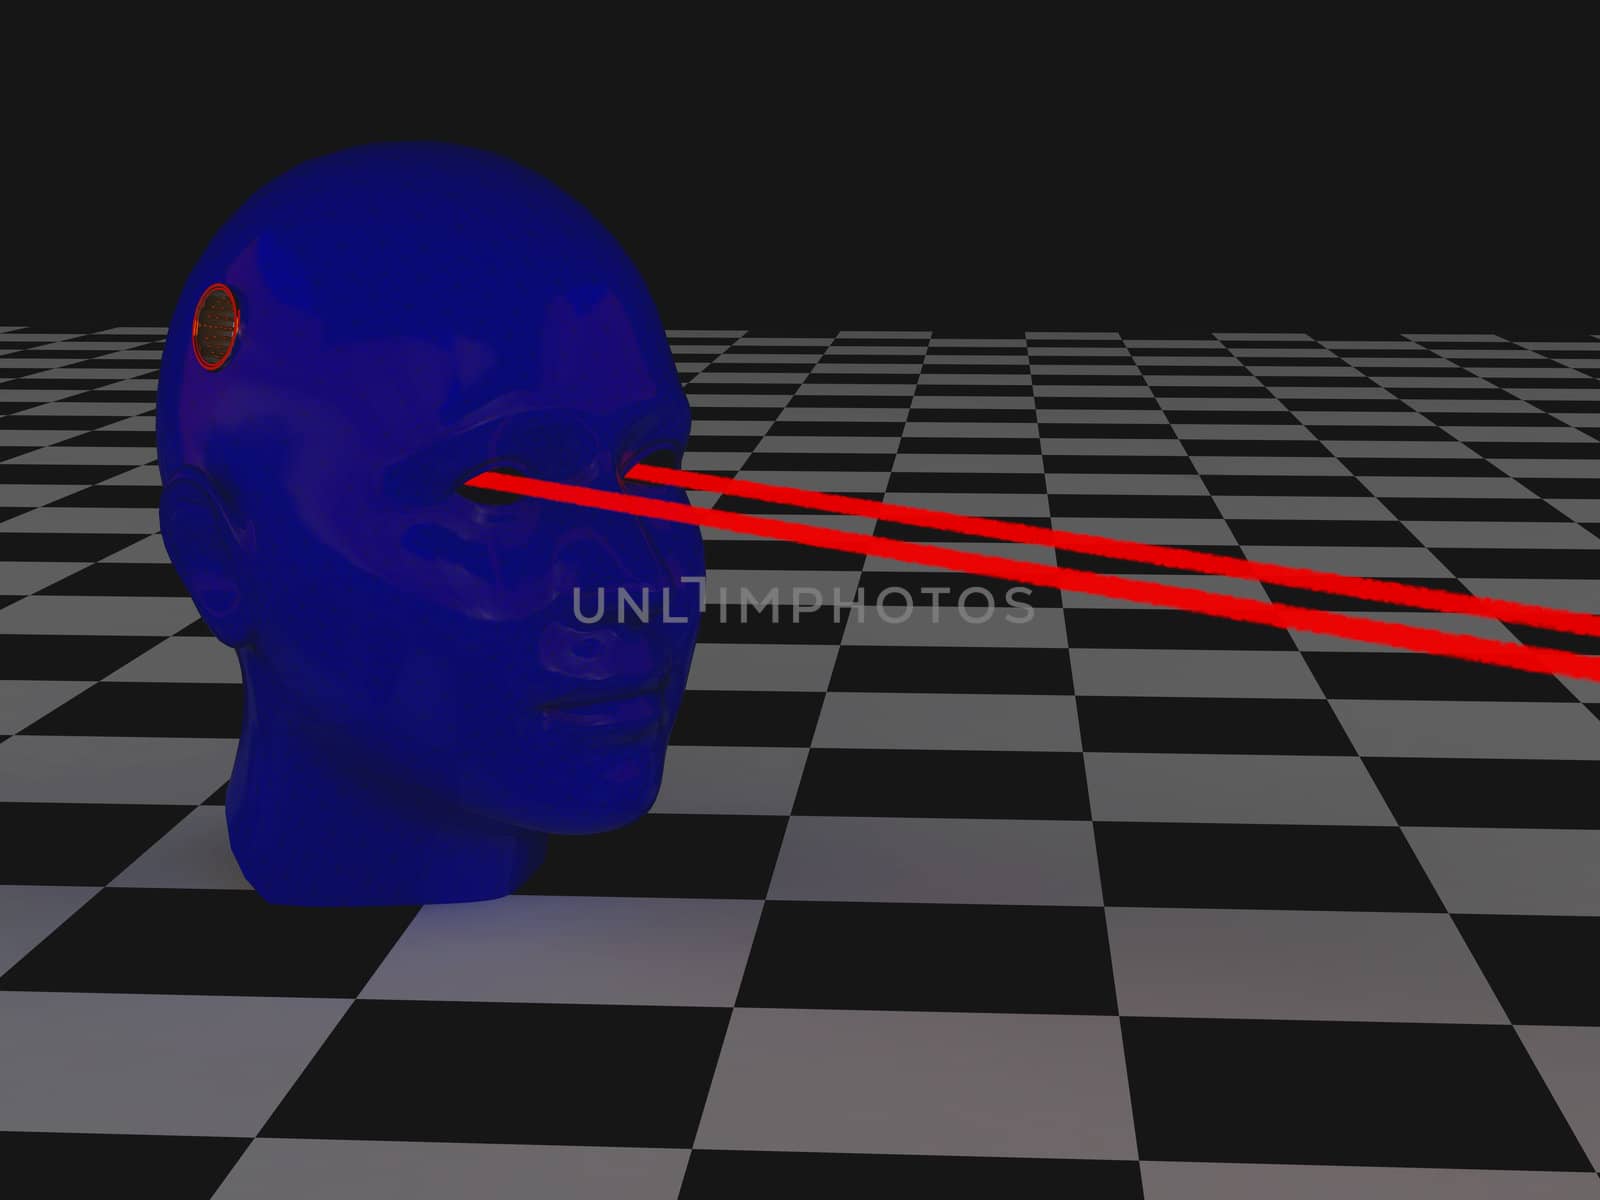 High resolution image head. 3d illustration. The head shoots the laser.